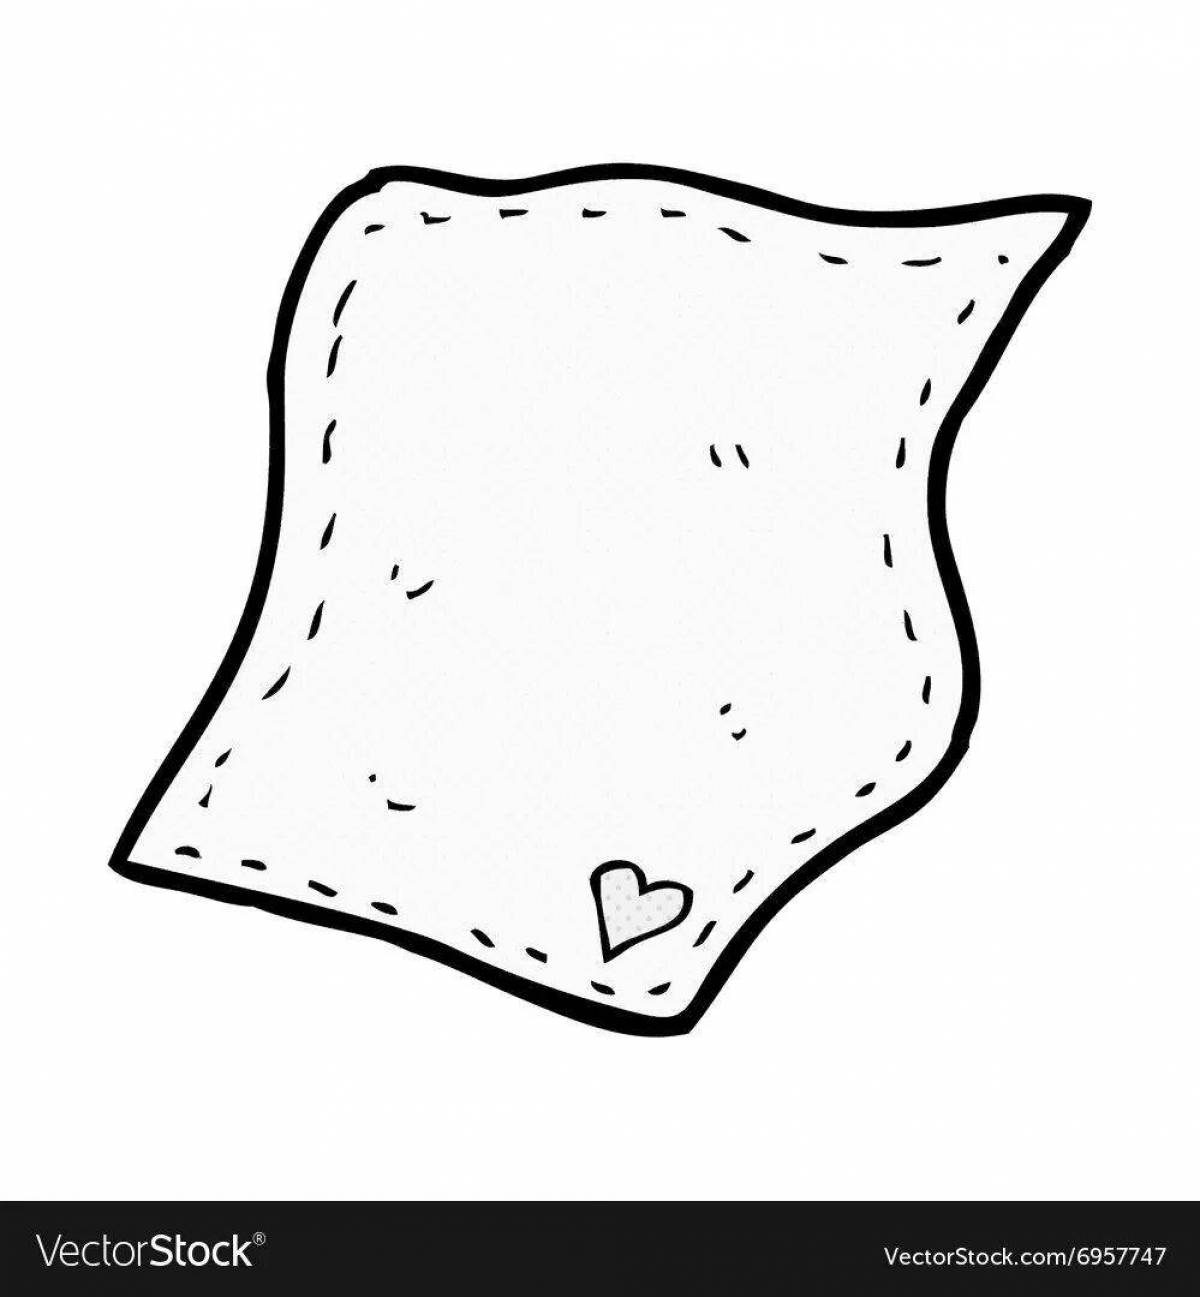 Playful handkerchief coloring page